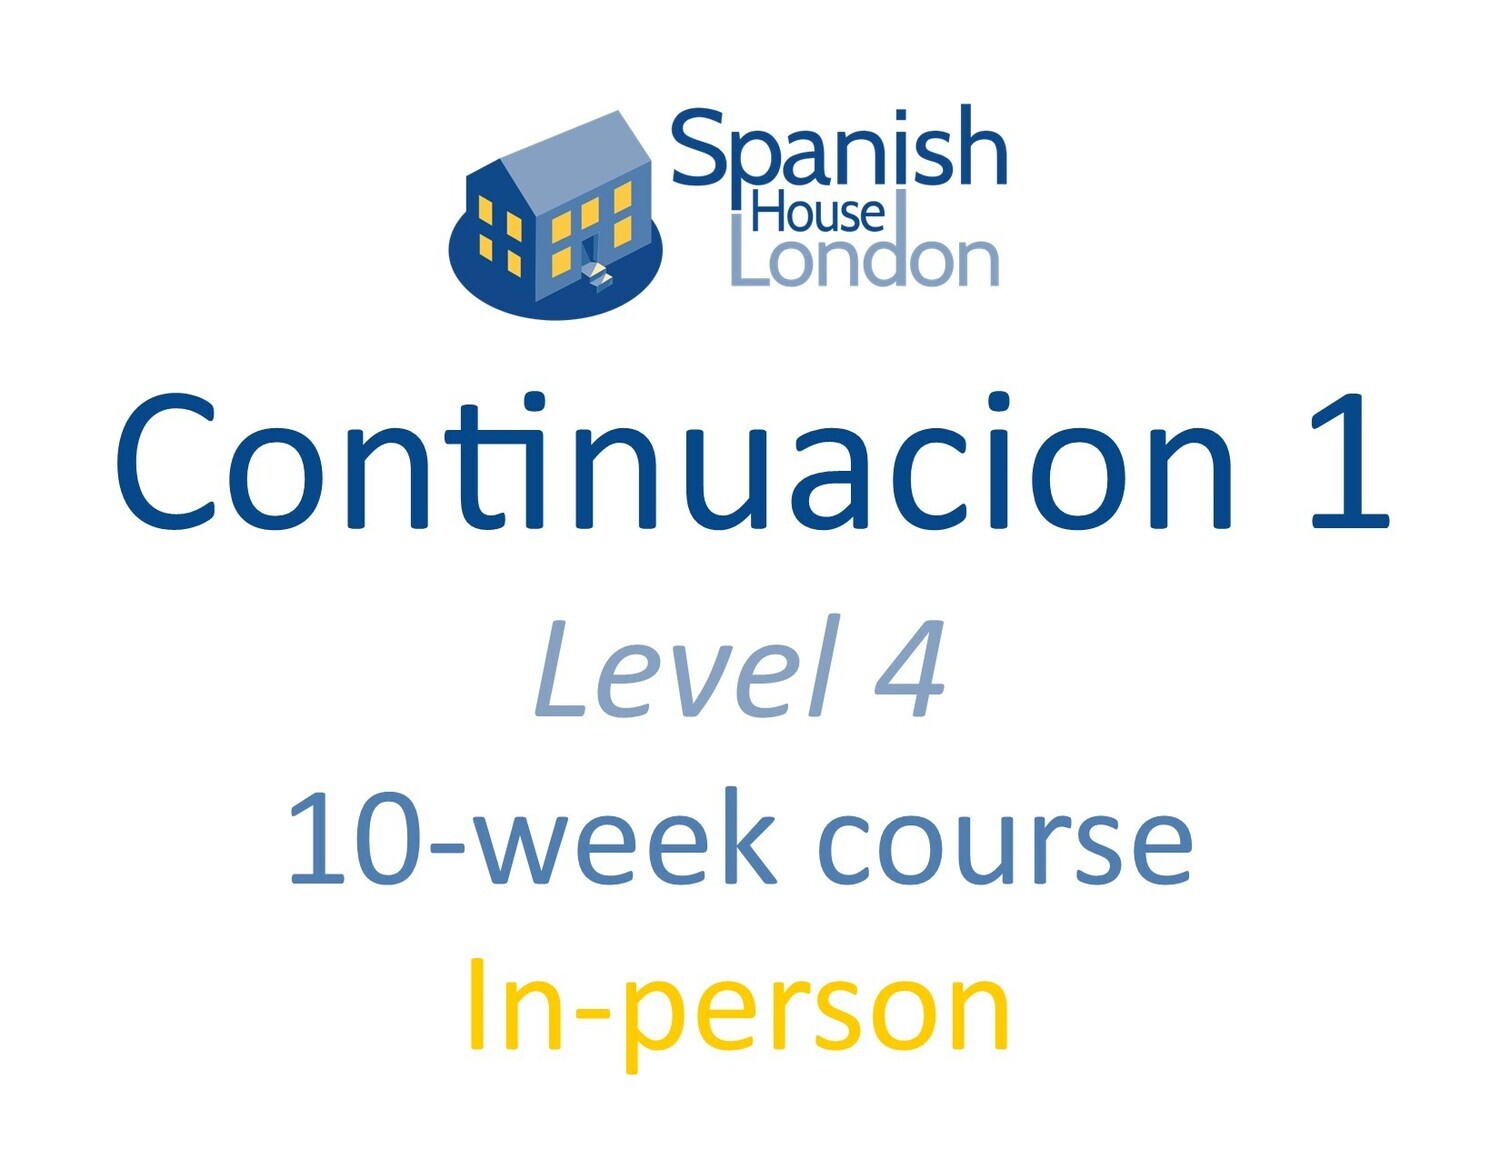 Continuacion 1 Course starting on 16th August at 7.30pm in Euston / King's Cross